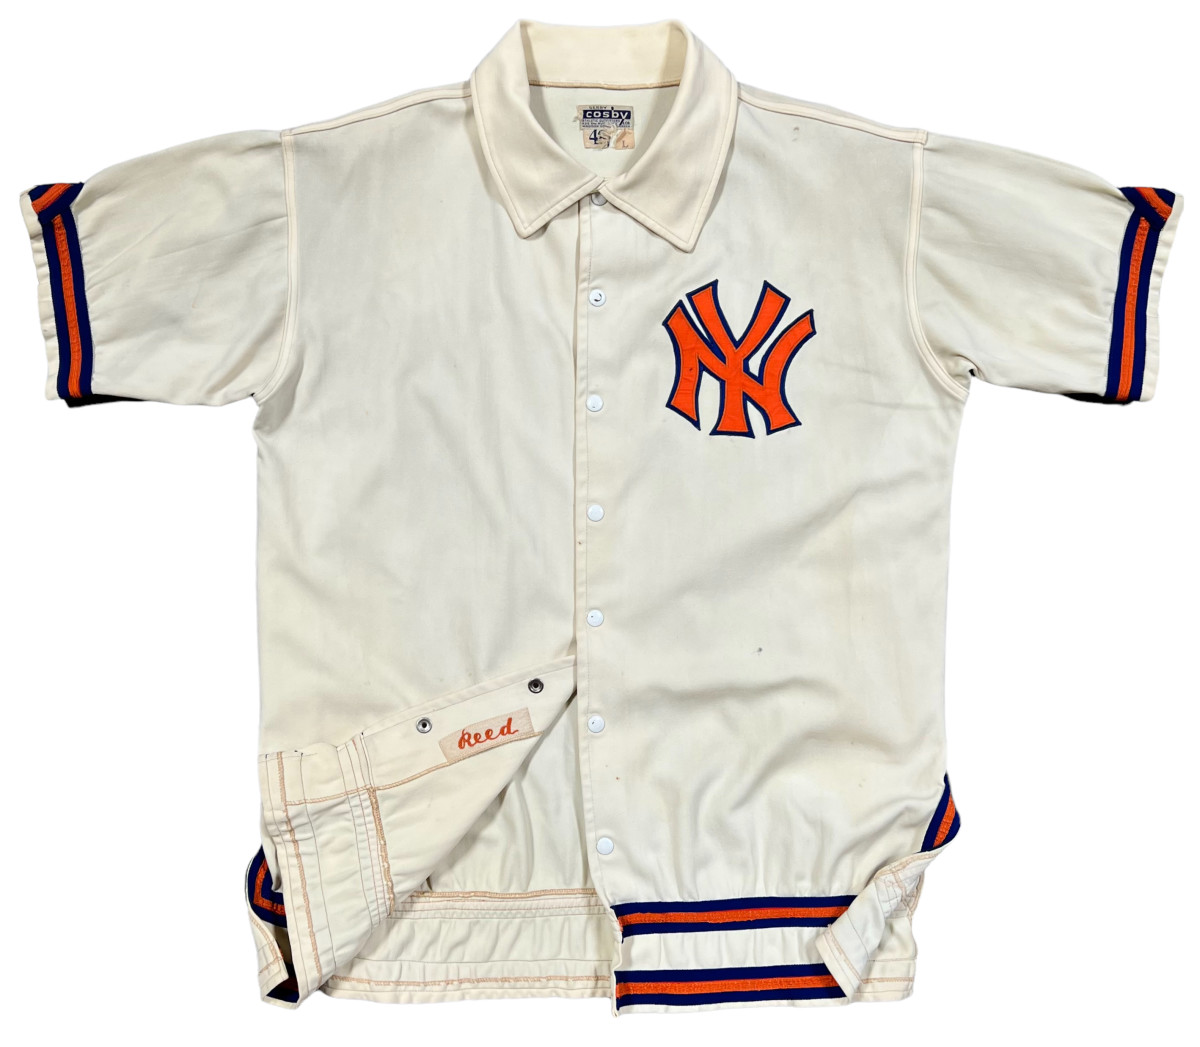 The New York Knicks warmup jacket Willie Reed wore during Game 7 of the 1970 NBA Finals.